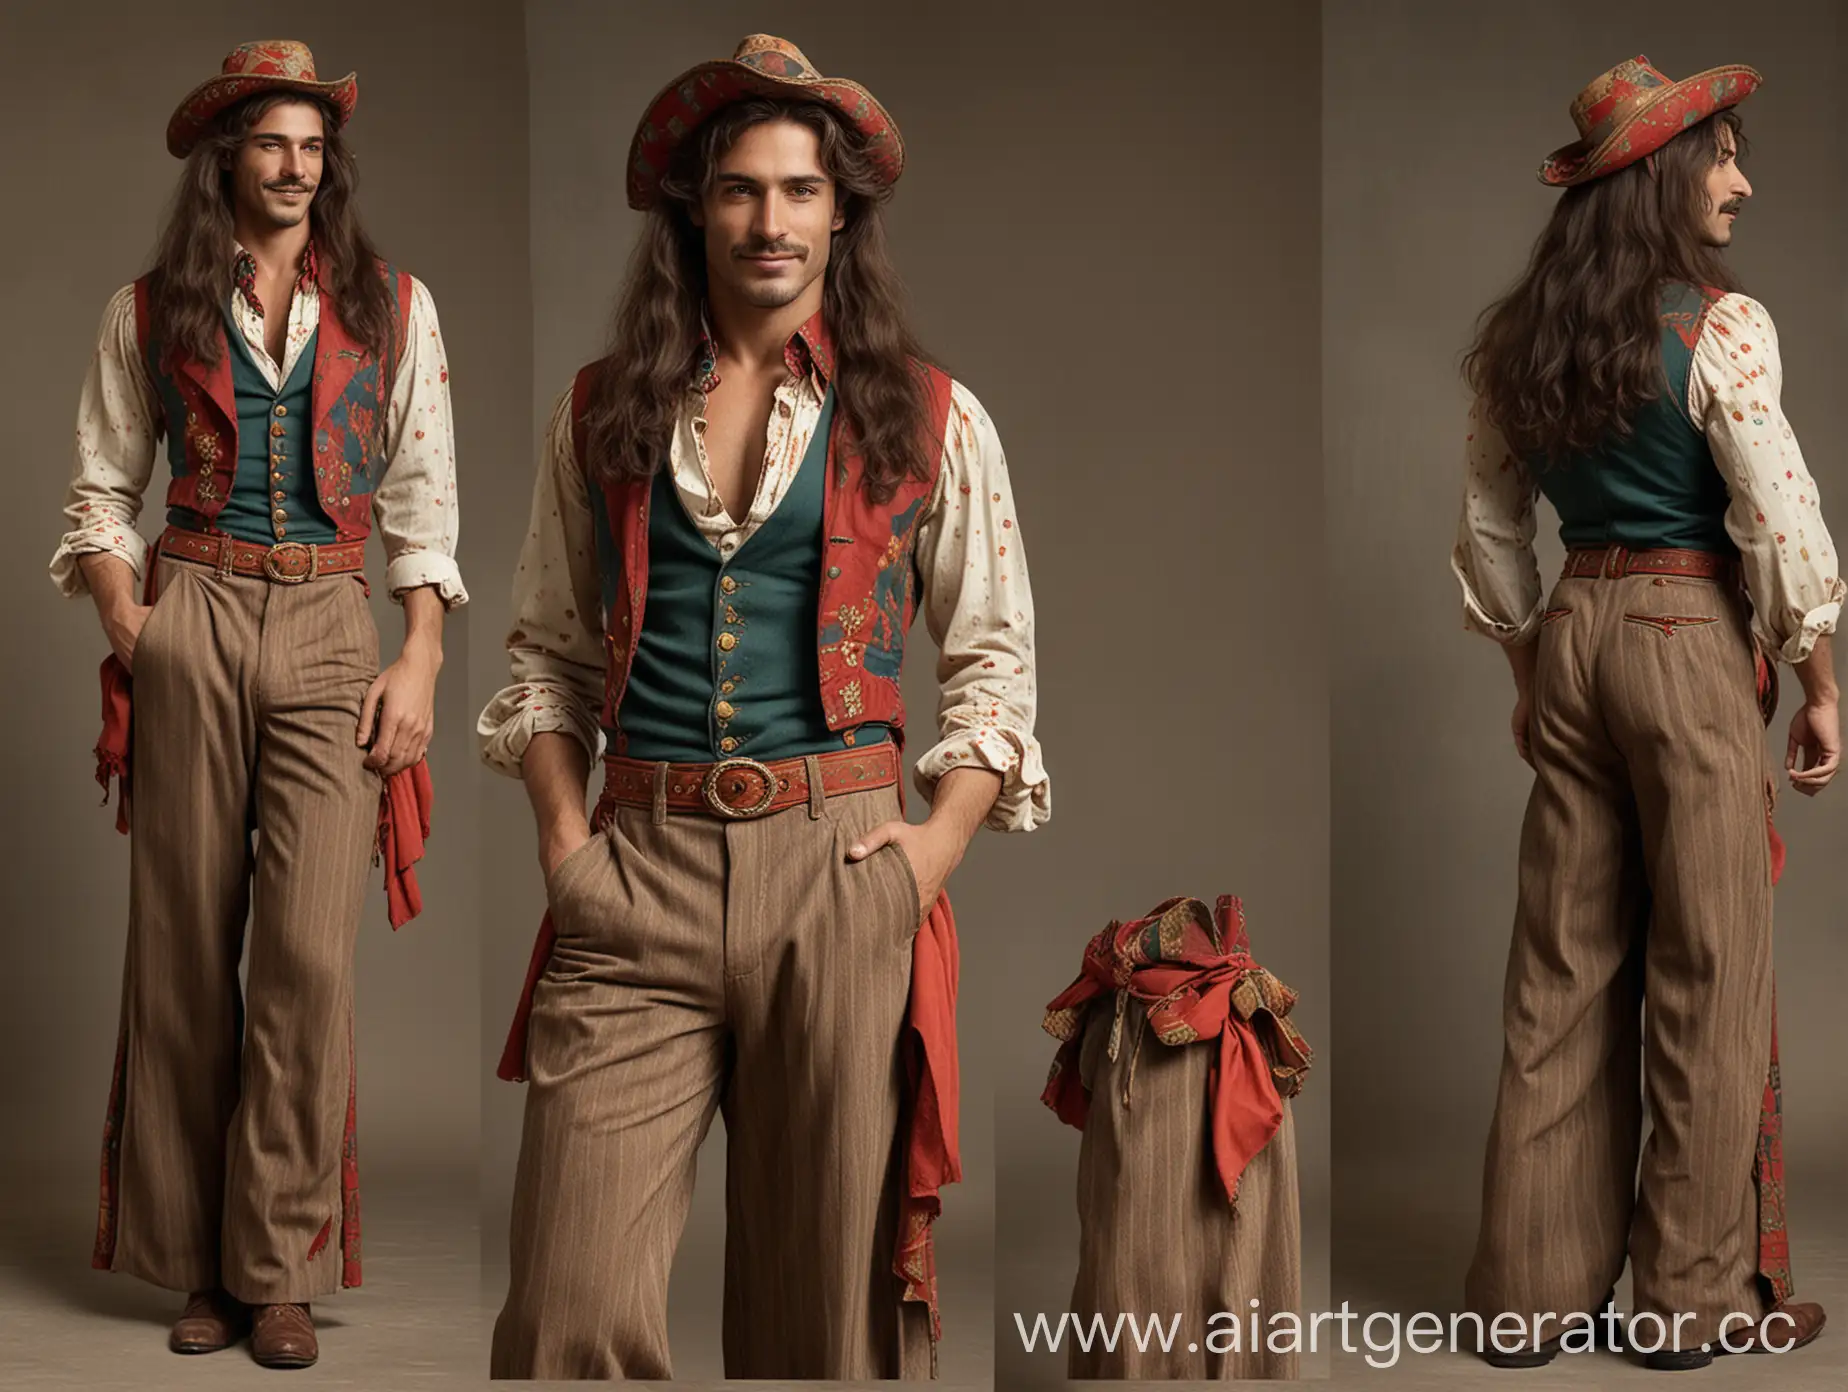 The Italian has a bright charisma and a sly smile. His image combines the features of a cowboy and a circus jester. Long hair, lean build with well-developed muscles. He wears a top and palazzo pants.